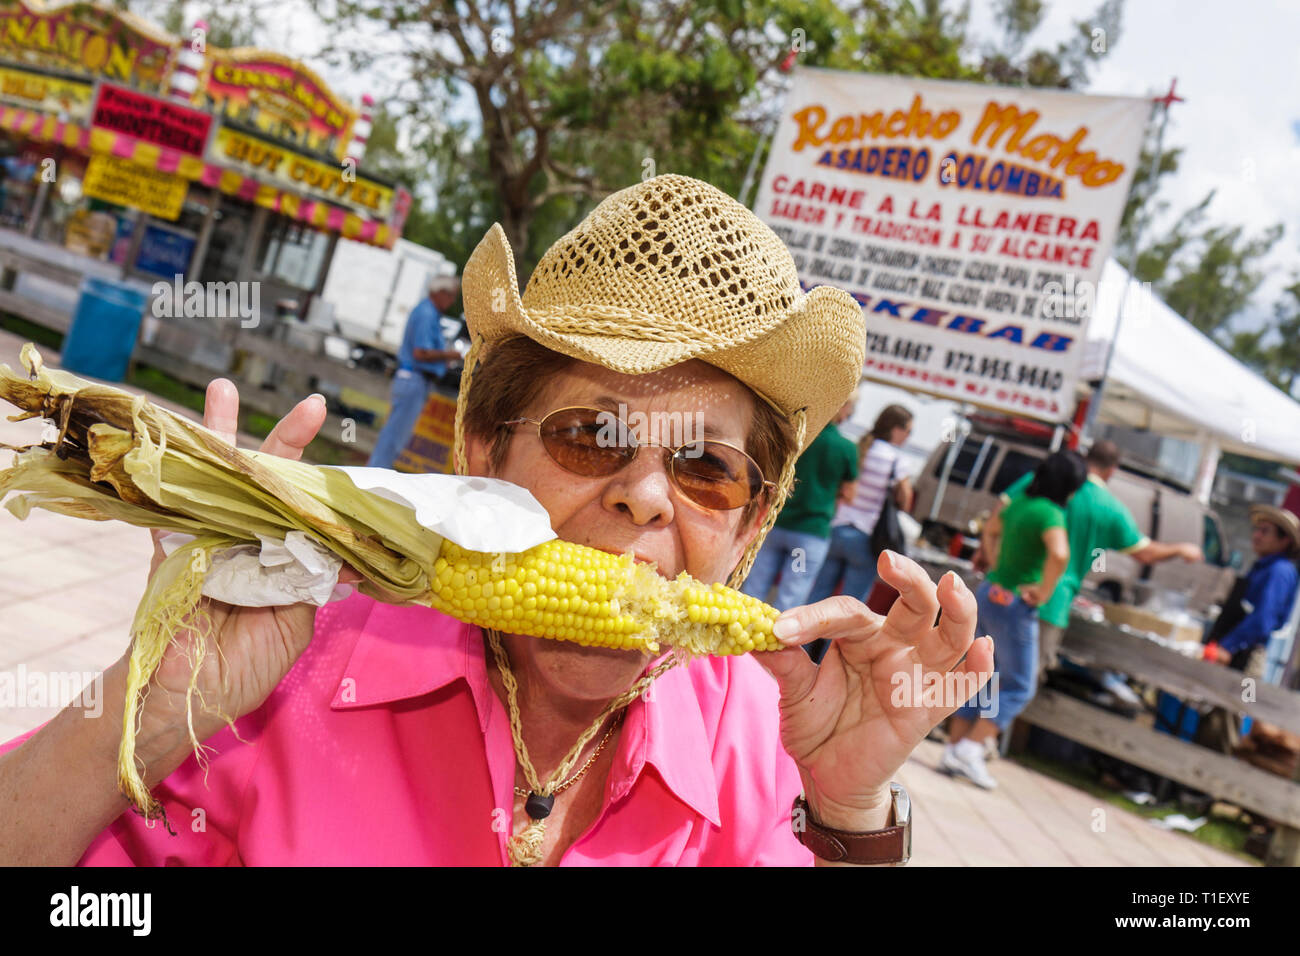 Miami Florida,Kendall,Tropical Park,Miami International Agriculture & Cattle Show,breeding,livestock trade,agri business,food,roasted corn on the cob, Stock Photo